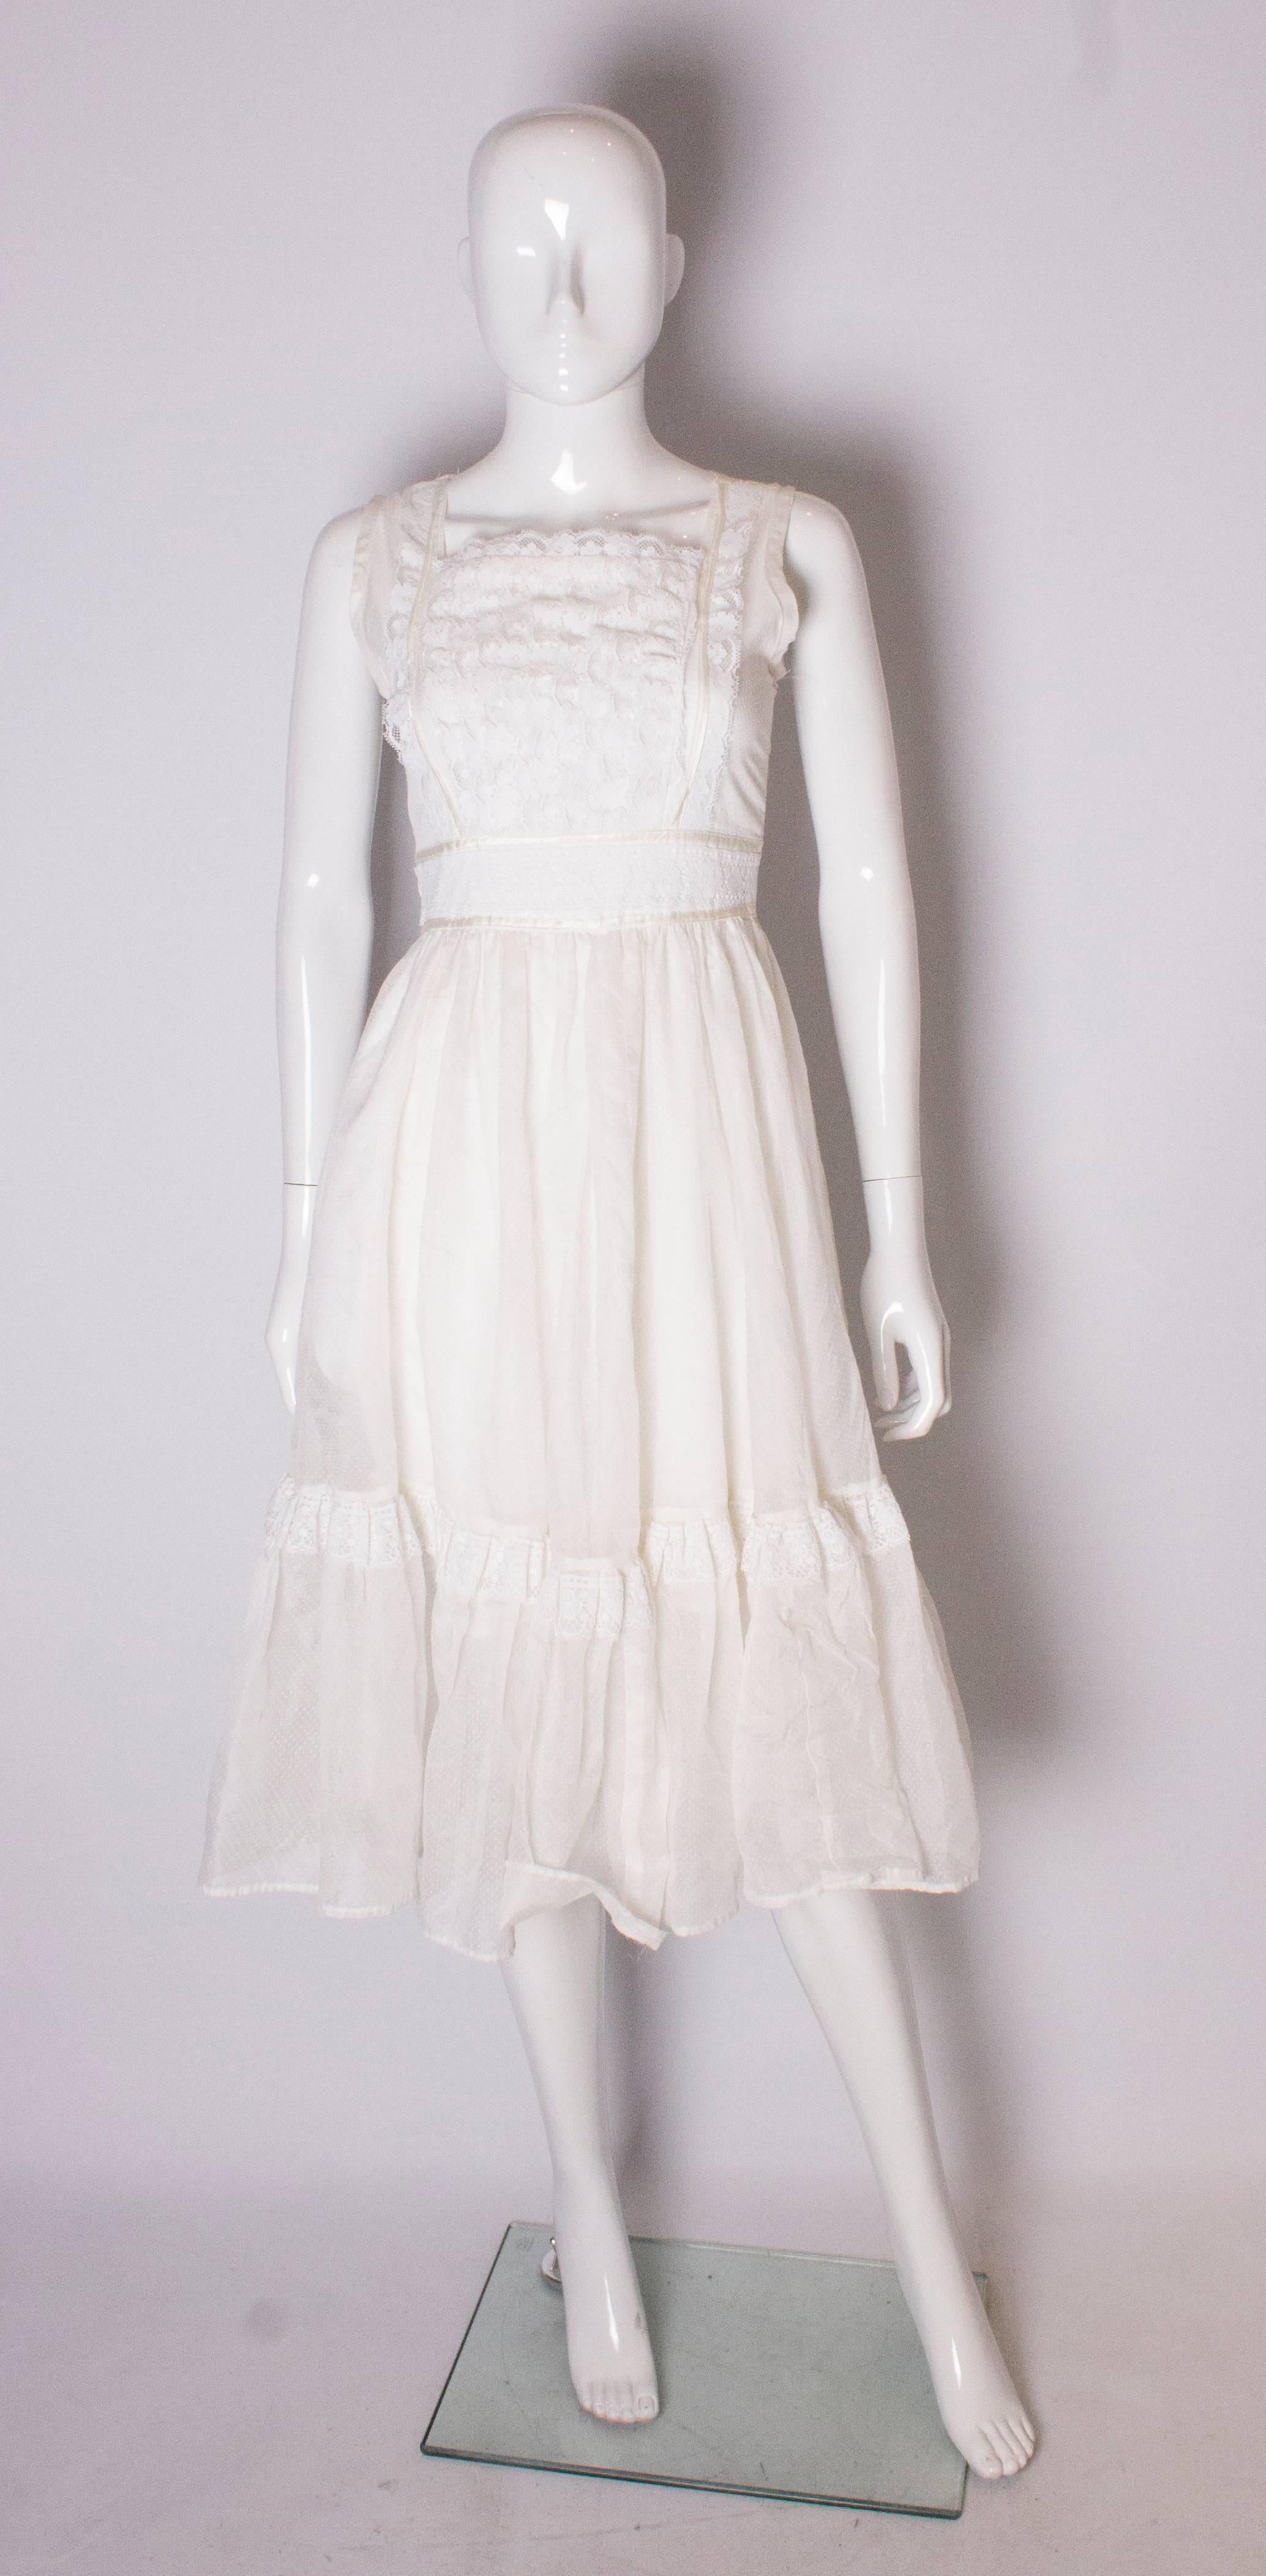 A pretty dress for Spring/Summer, in a white spot fabric, with lace detail on the front and above the frill. The dress has a square neckline, is lined and has a cental back zip.